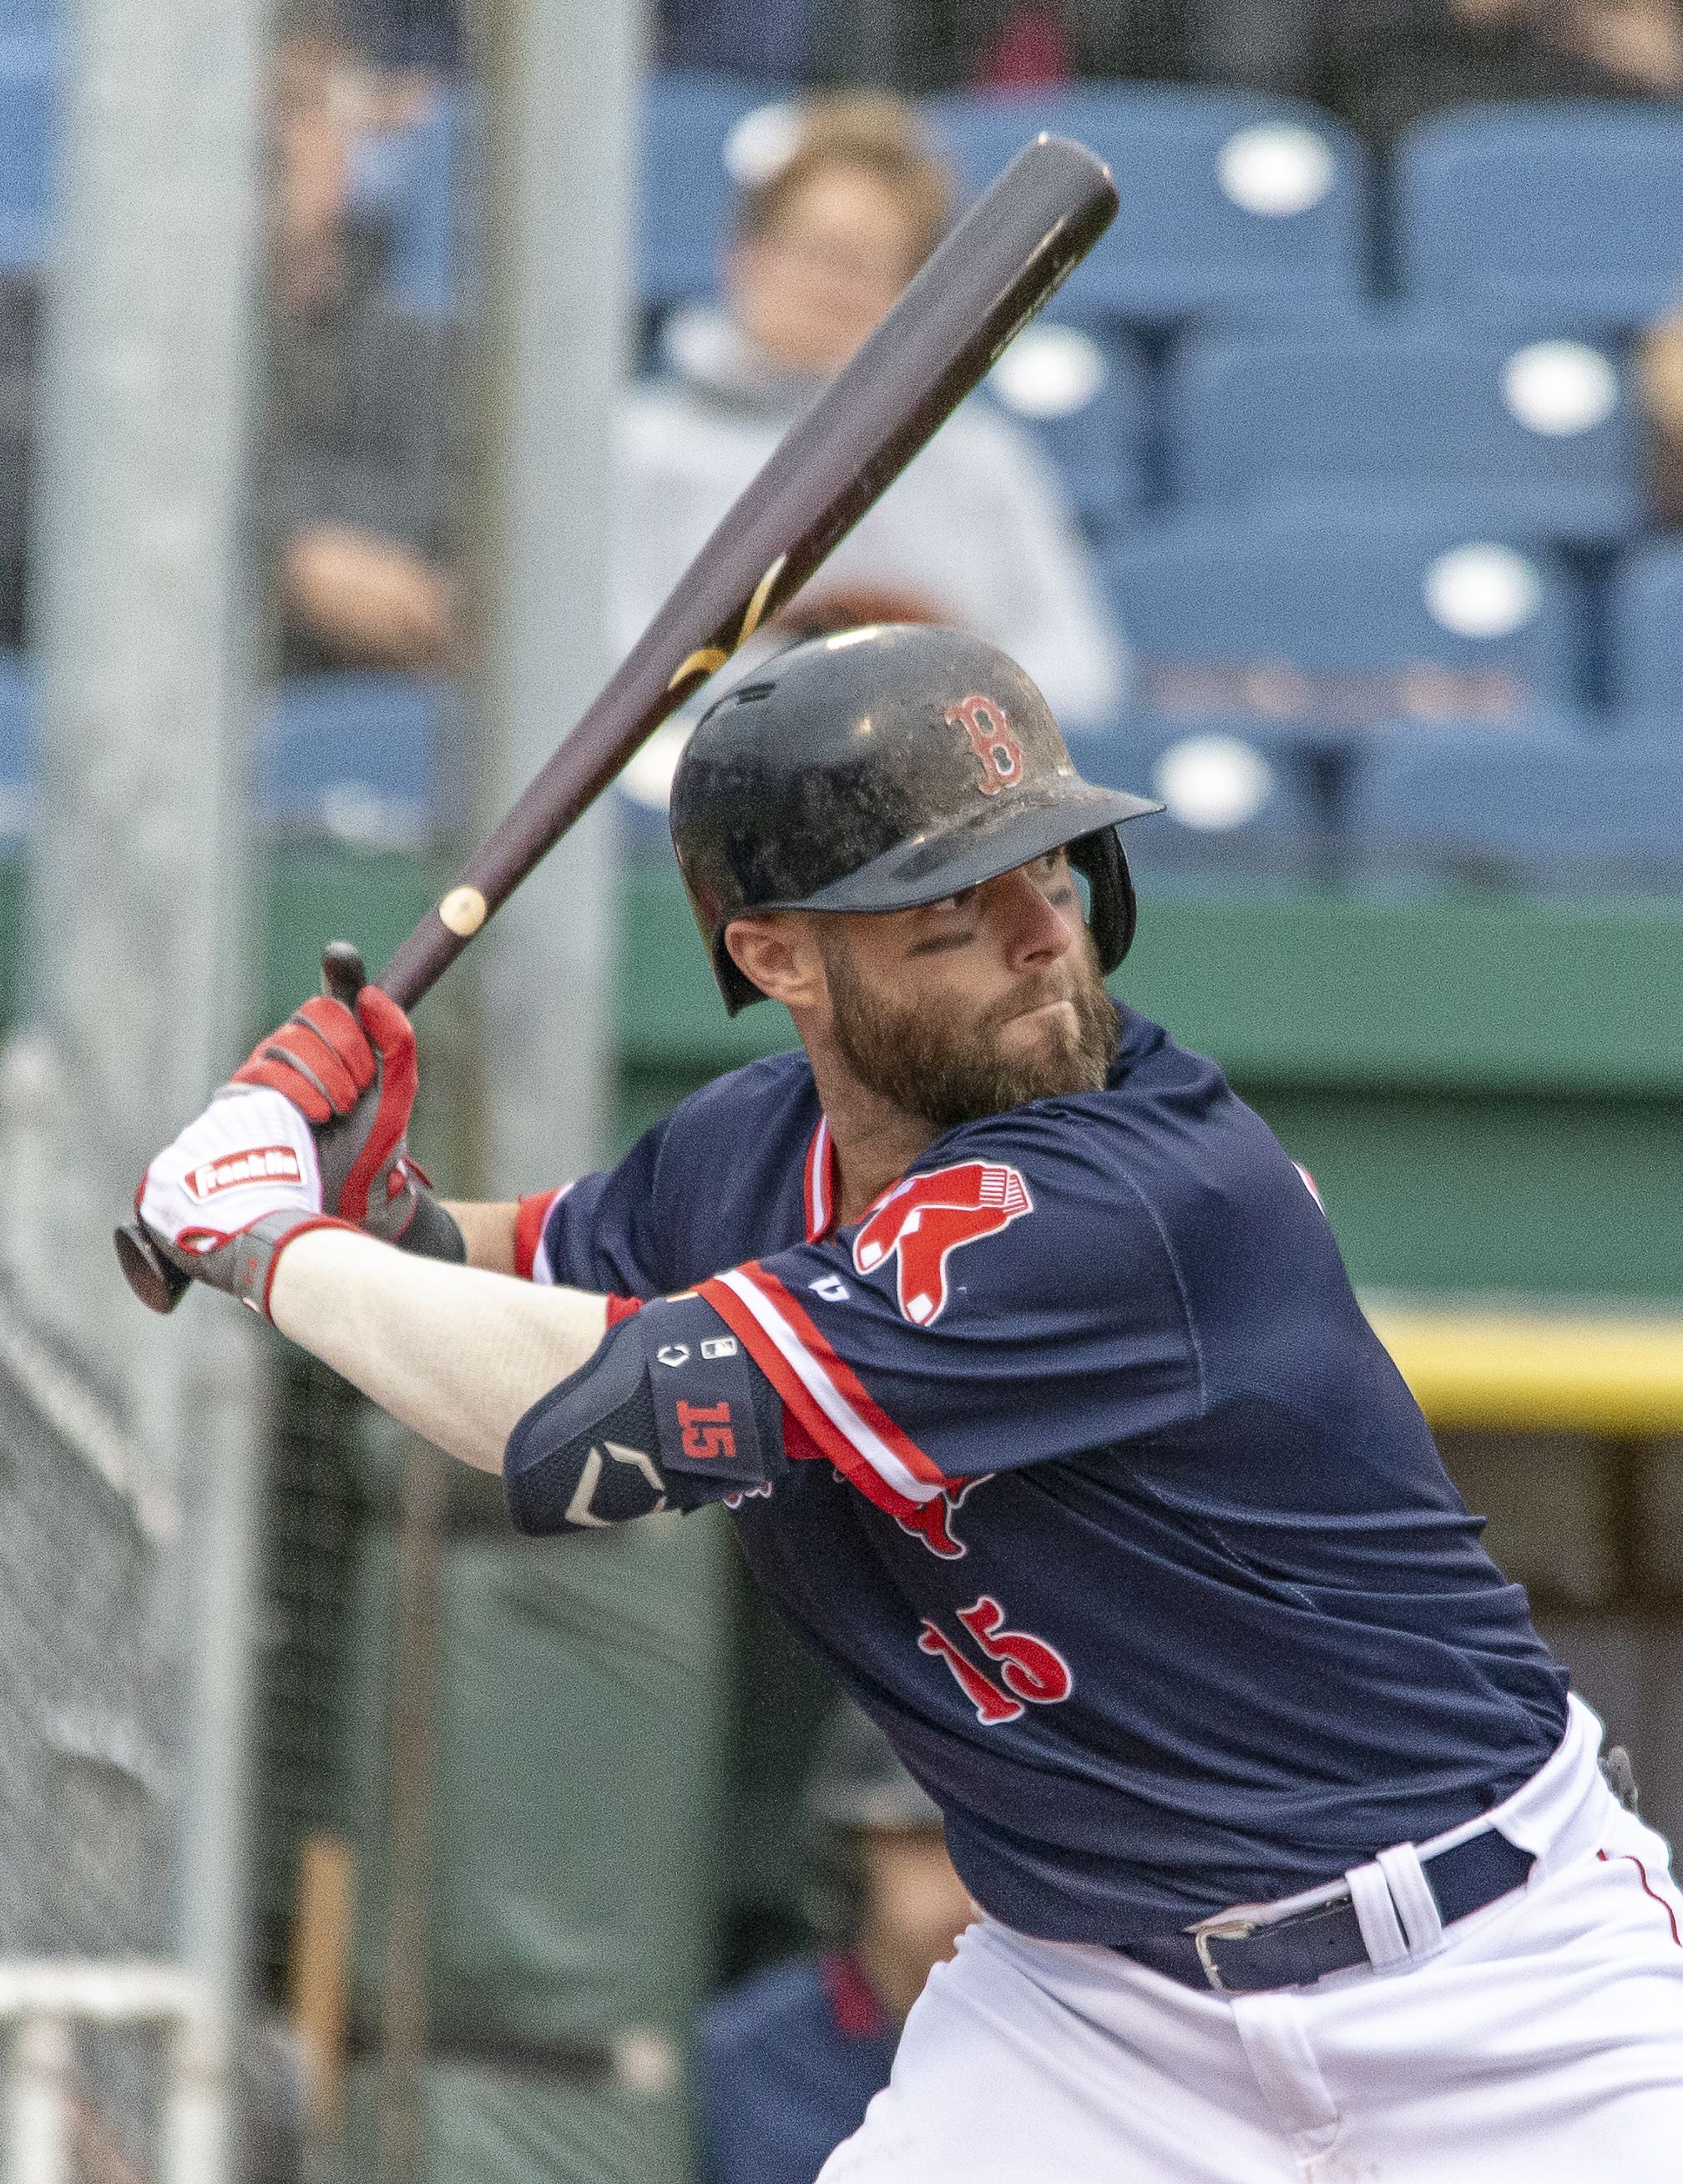 Dustin Pedroia stats show he had an unprecedented career